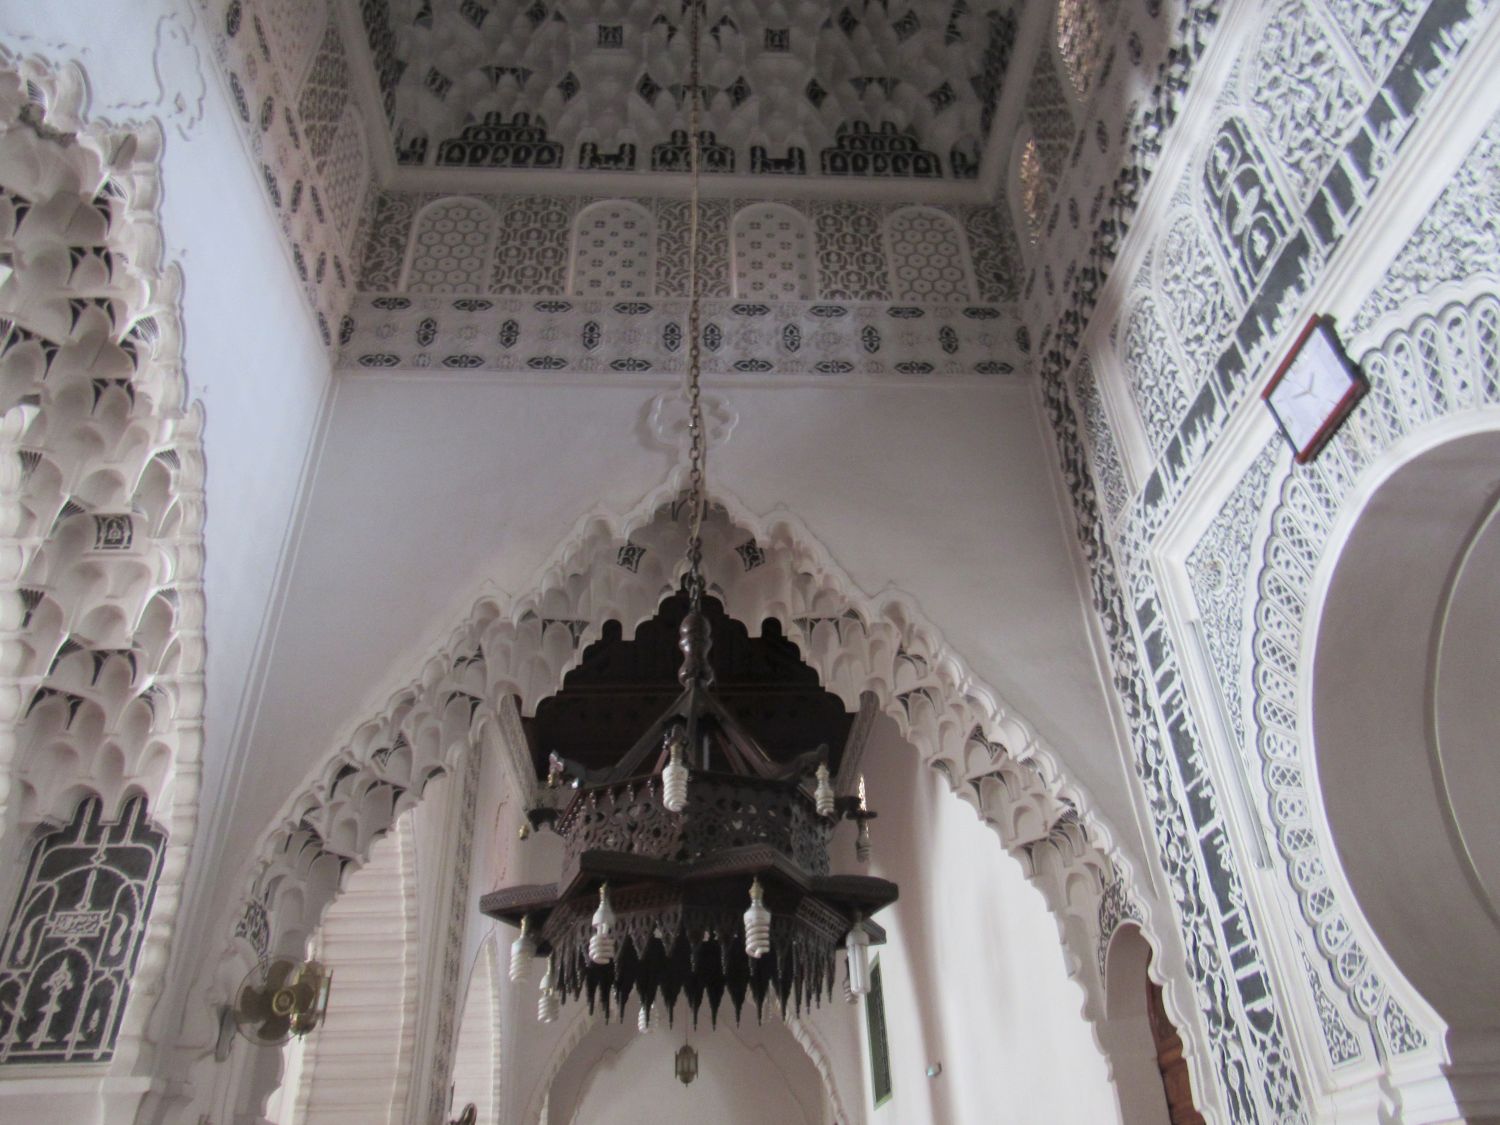 Interior view, chandelier and the muqrnas embellished ceiling and archeways of the mihrab bay, painted in black and white.